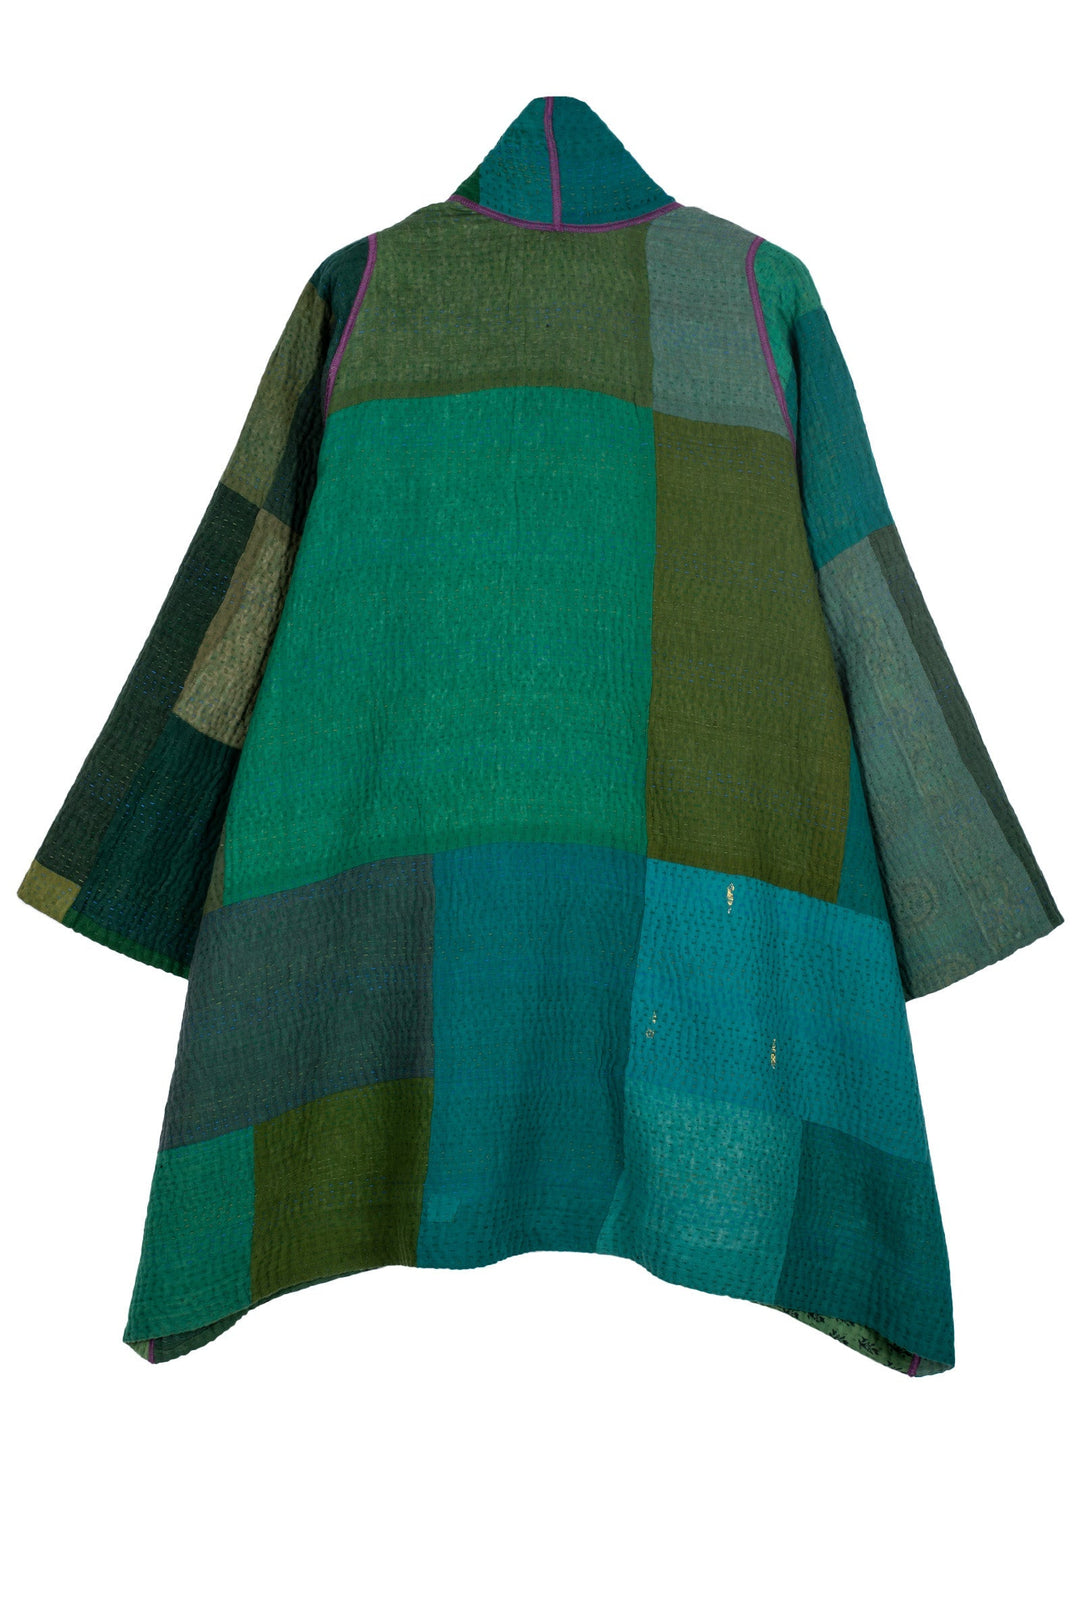 OMBRE PATCHED KANTHA A-LINE JKT - op4003-grn -